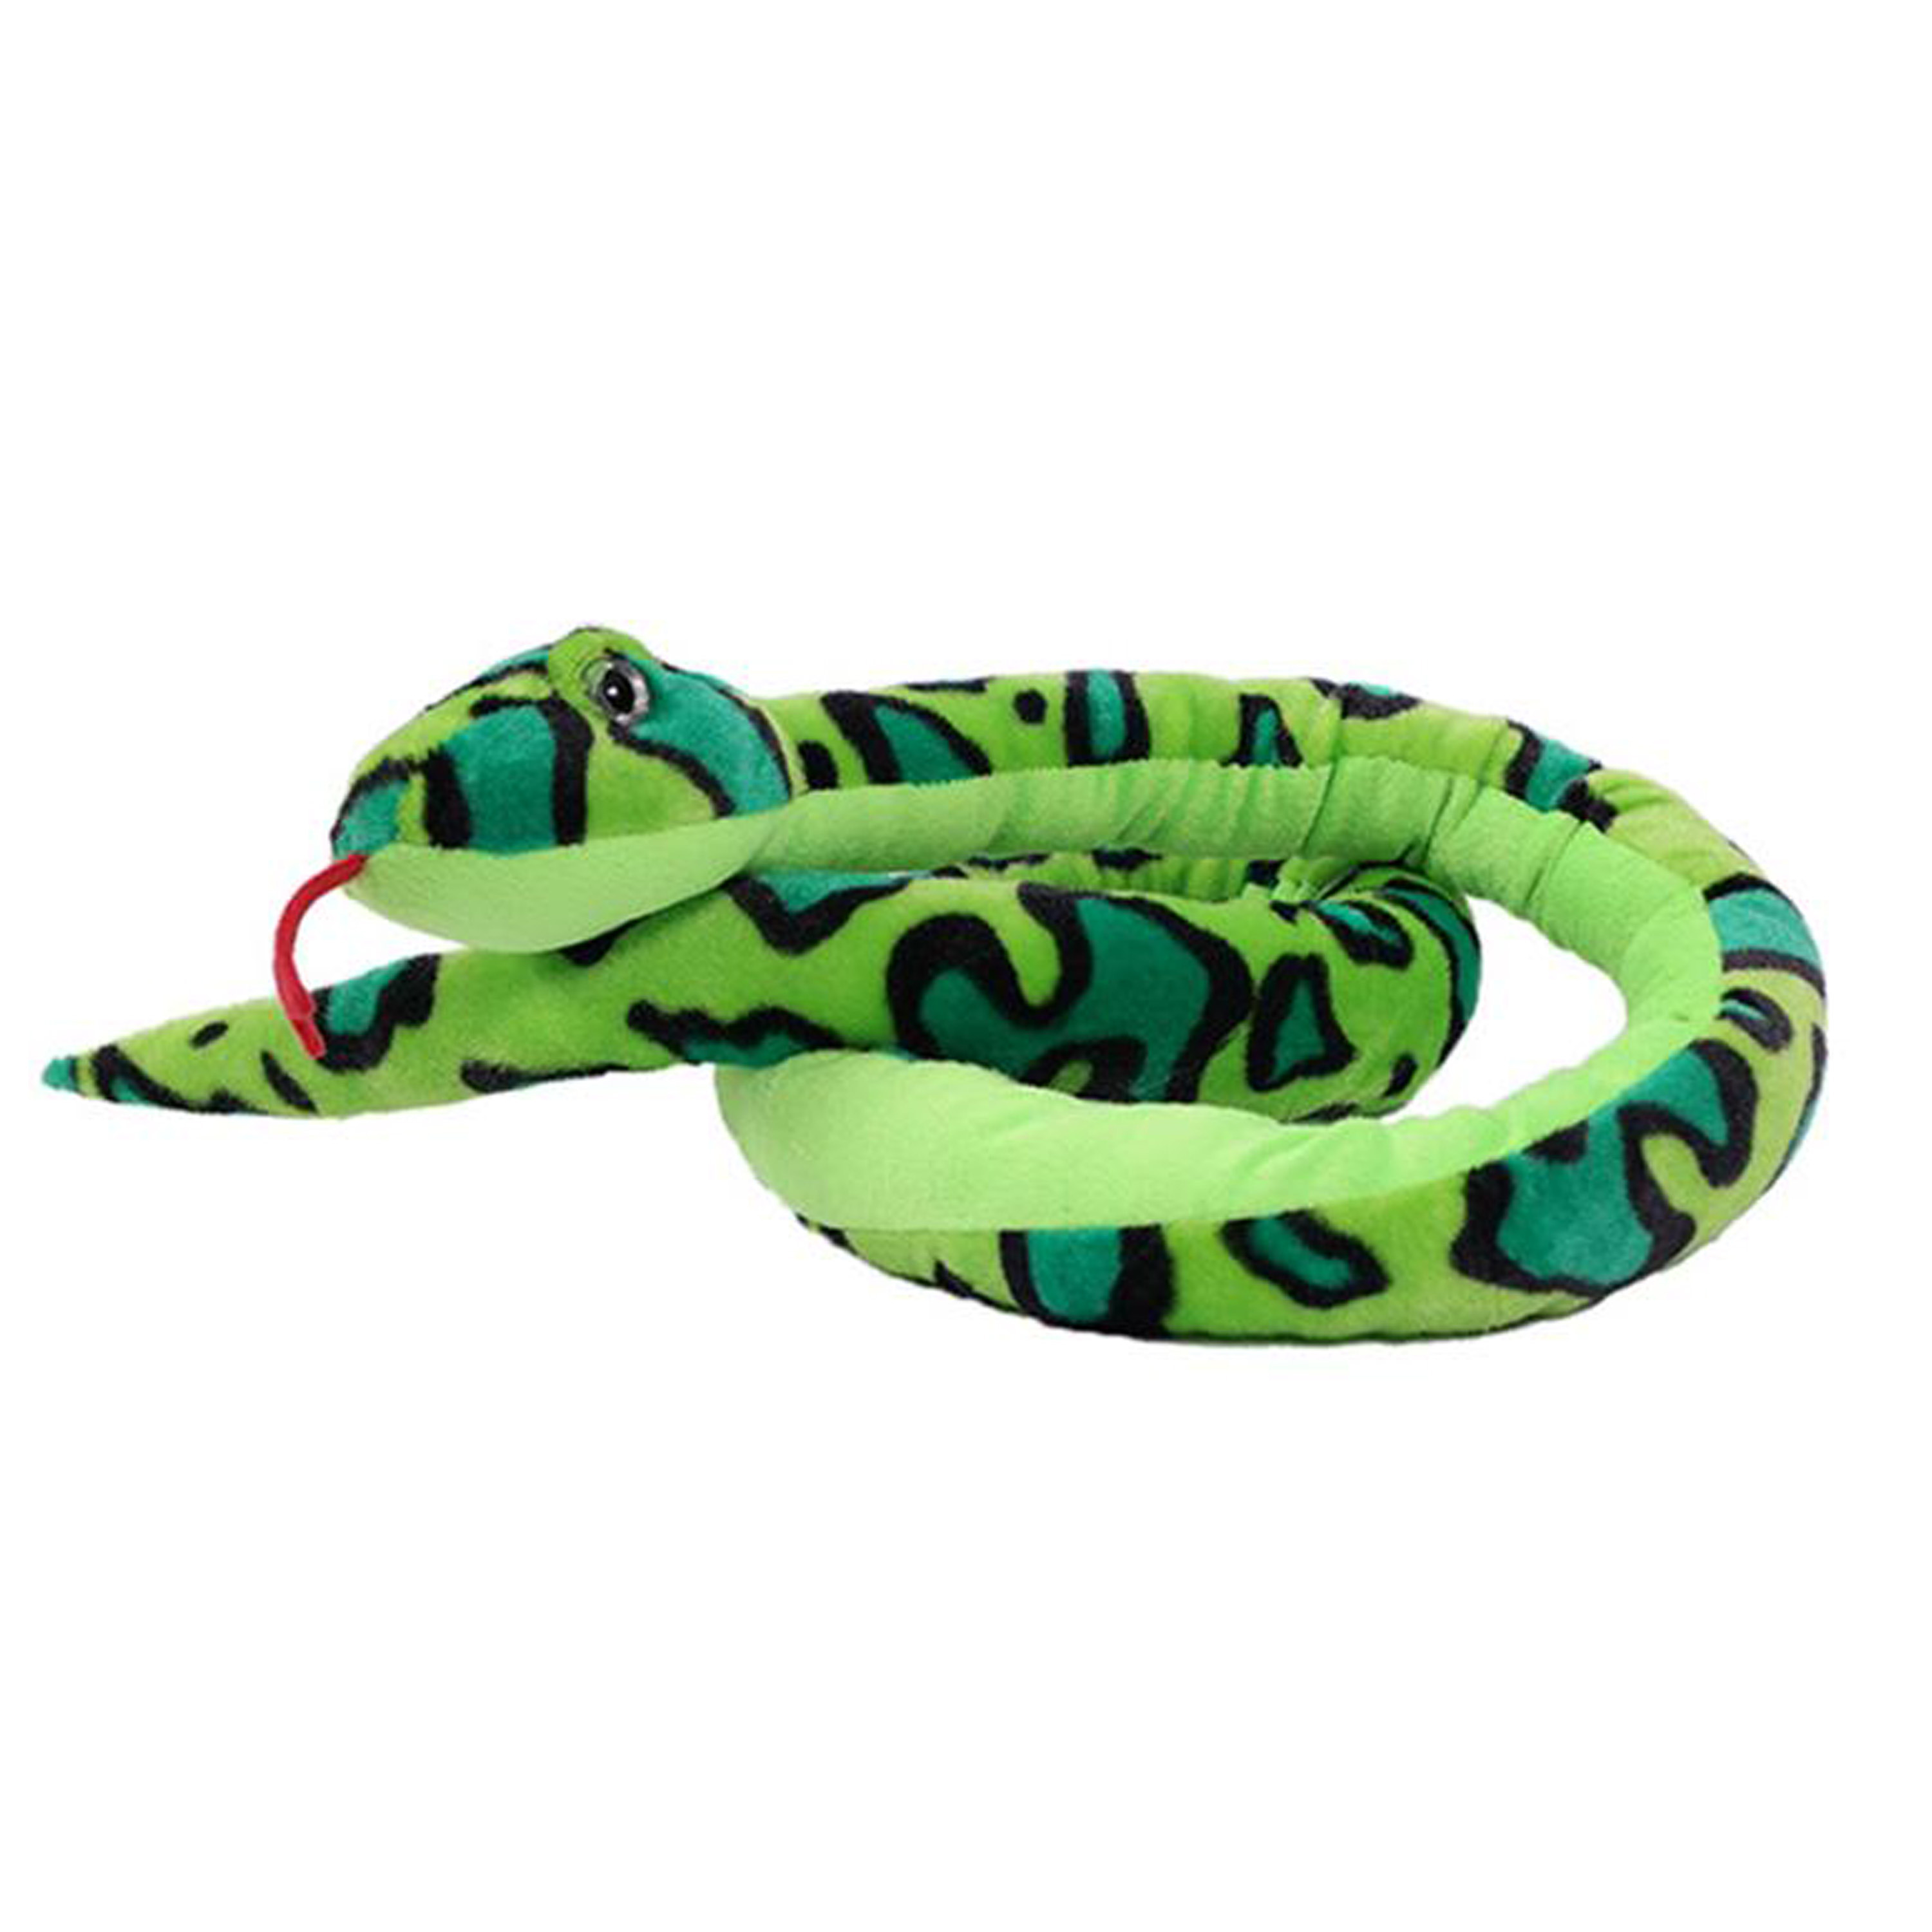 PIA Soft Toys Pia Toys Knuffeldier Boomslang - zachte pluche stof - groen - kwaliteit knuffels - 250 cm -